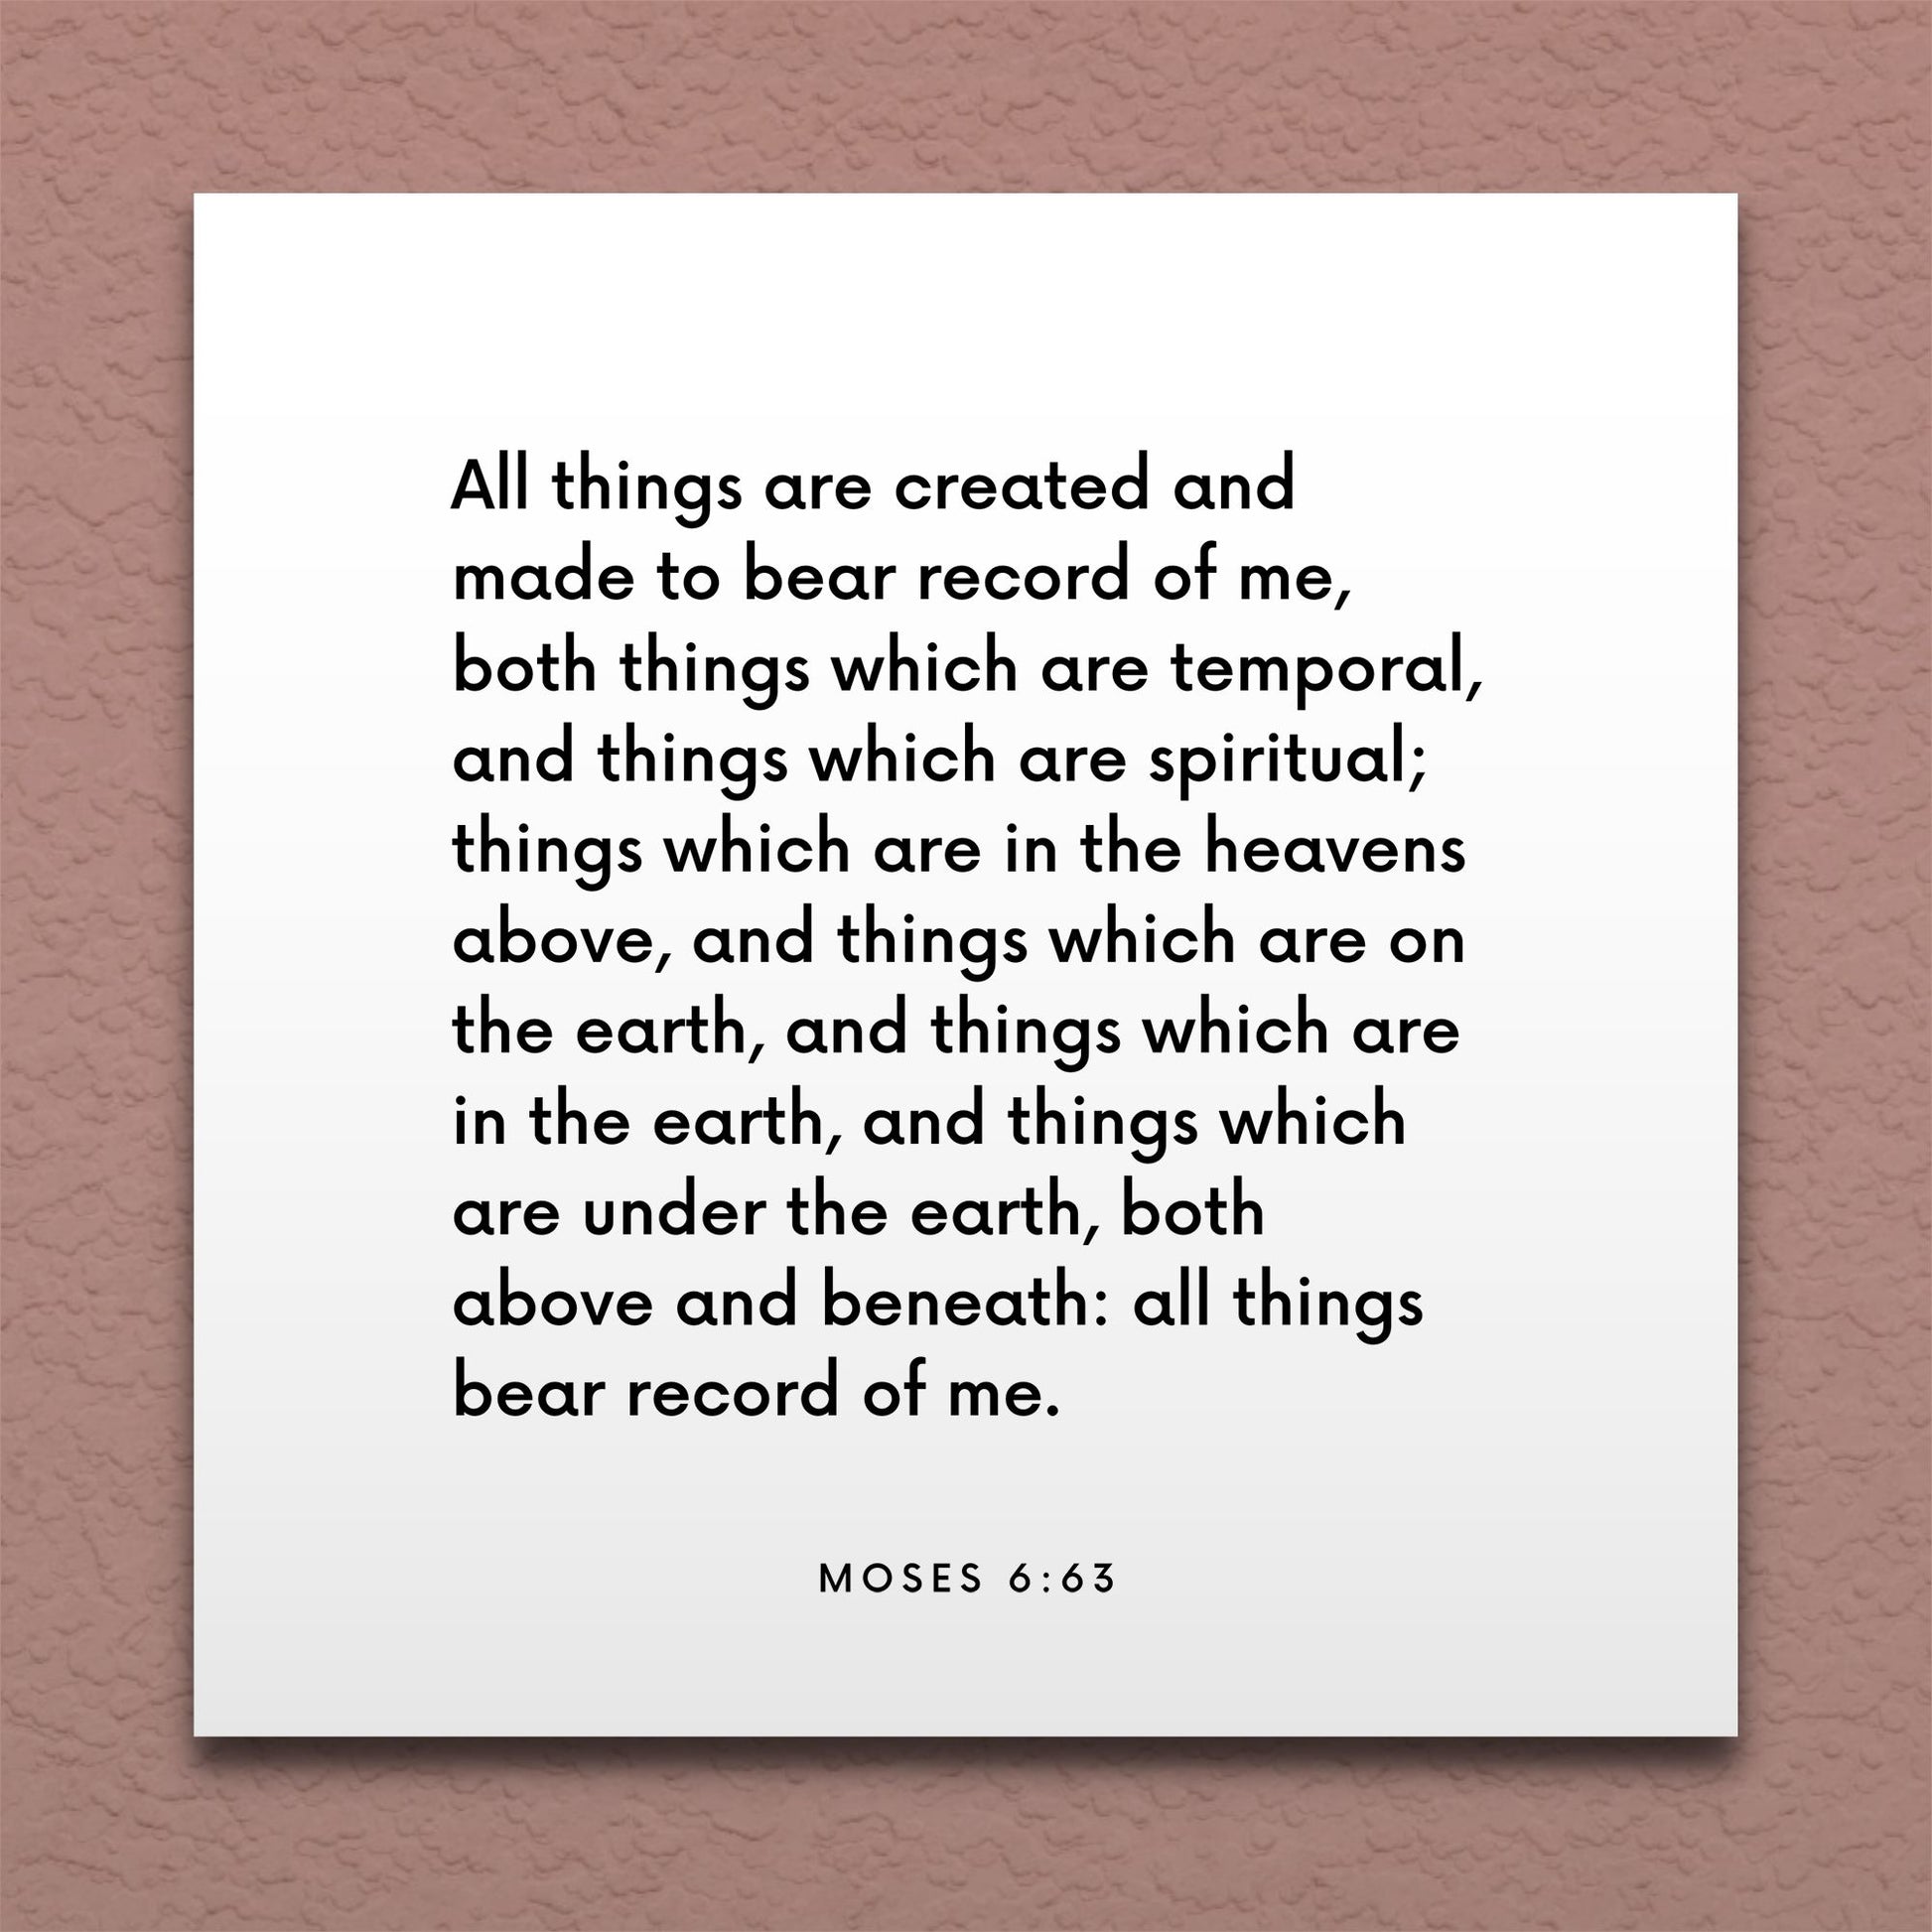 Wall-mounted scripture tile for Moses 6:63 - "All things bear record of me"